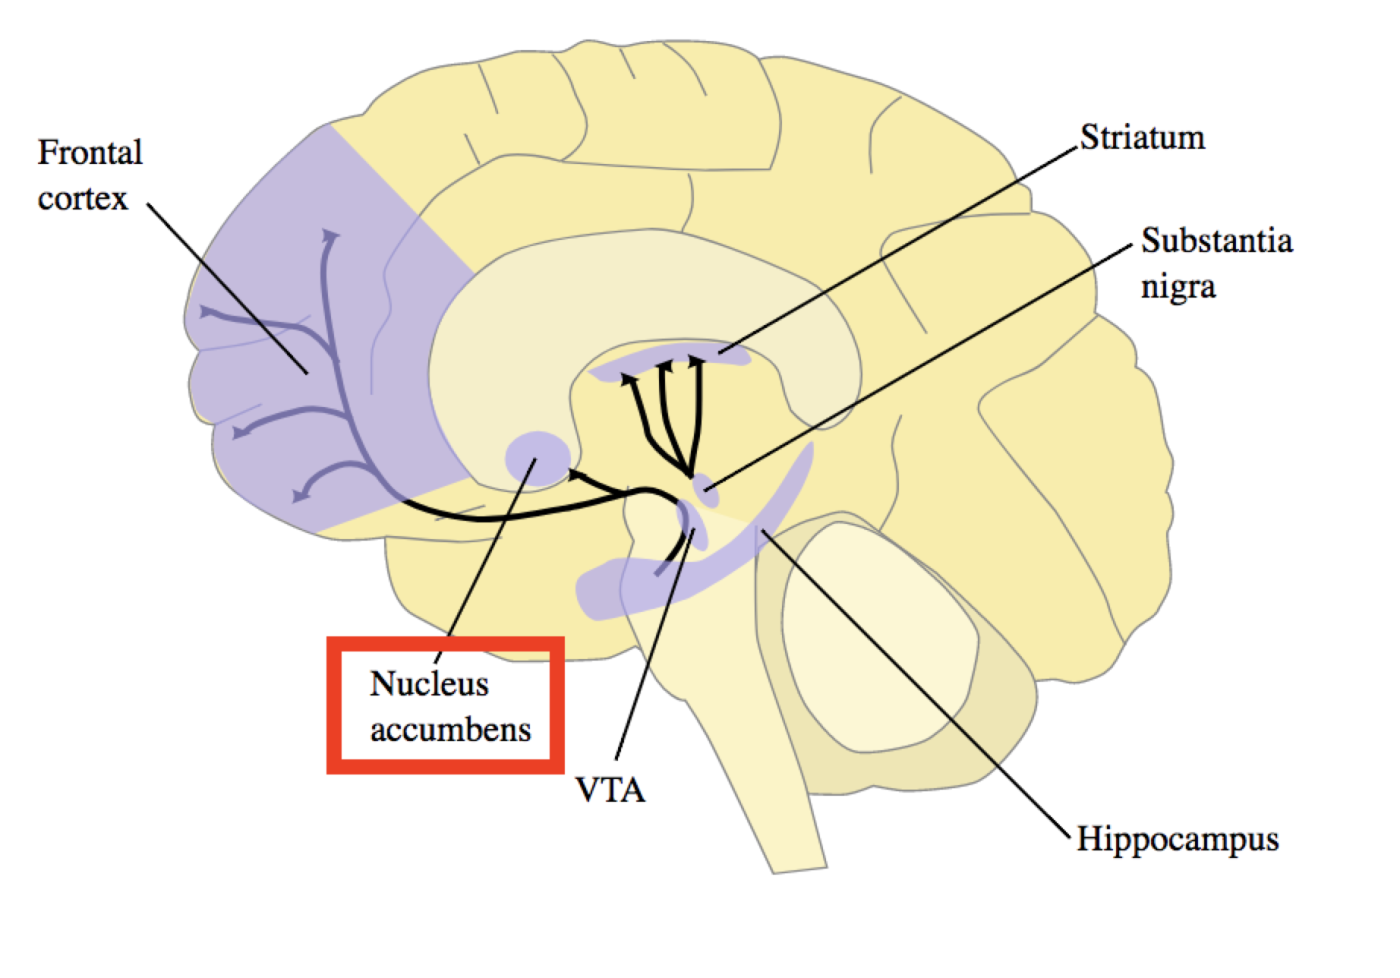 Image of the brain with the nucleus accumbens highlighted